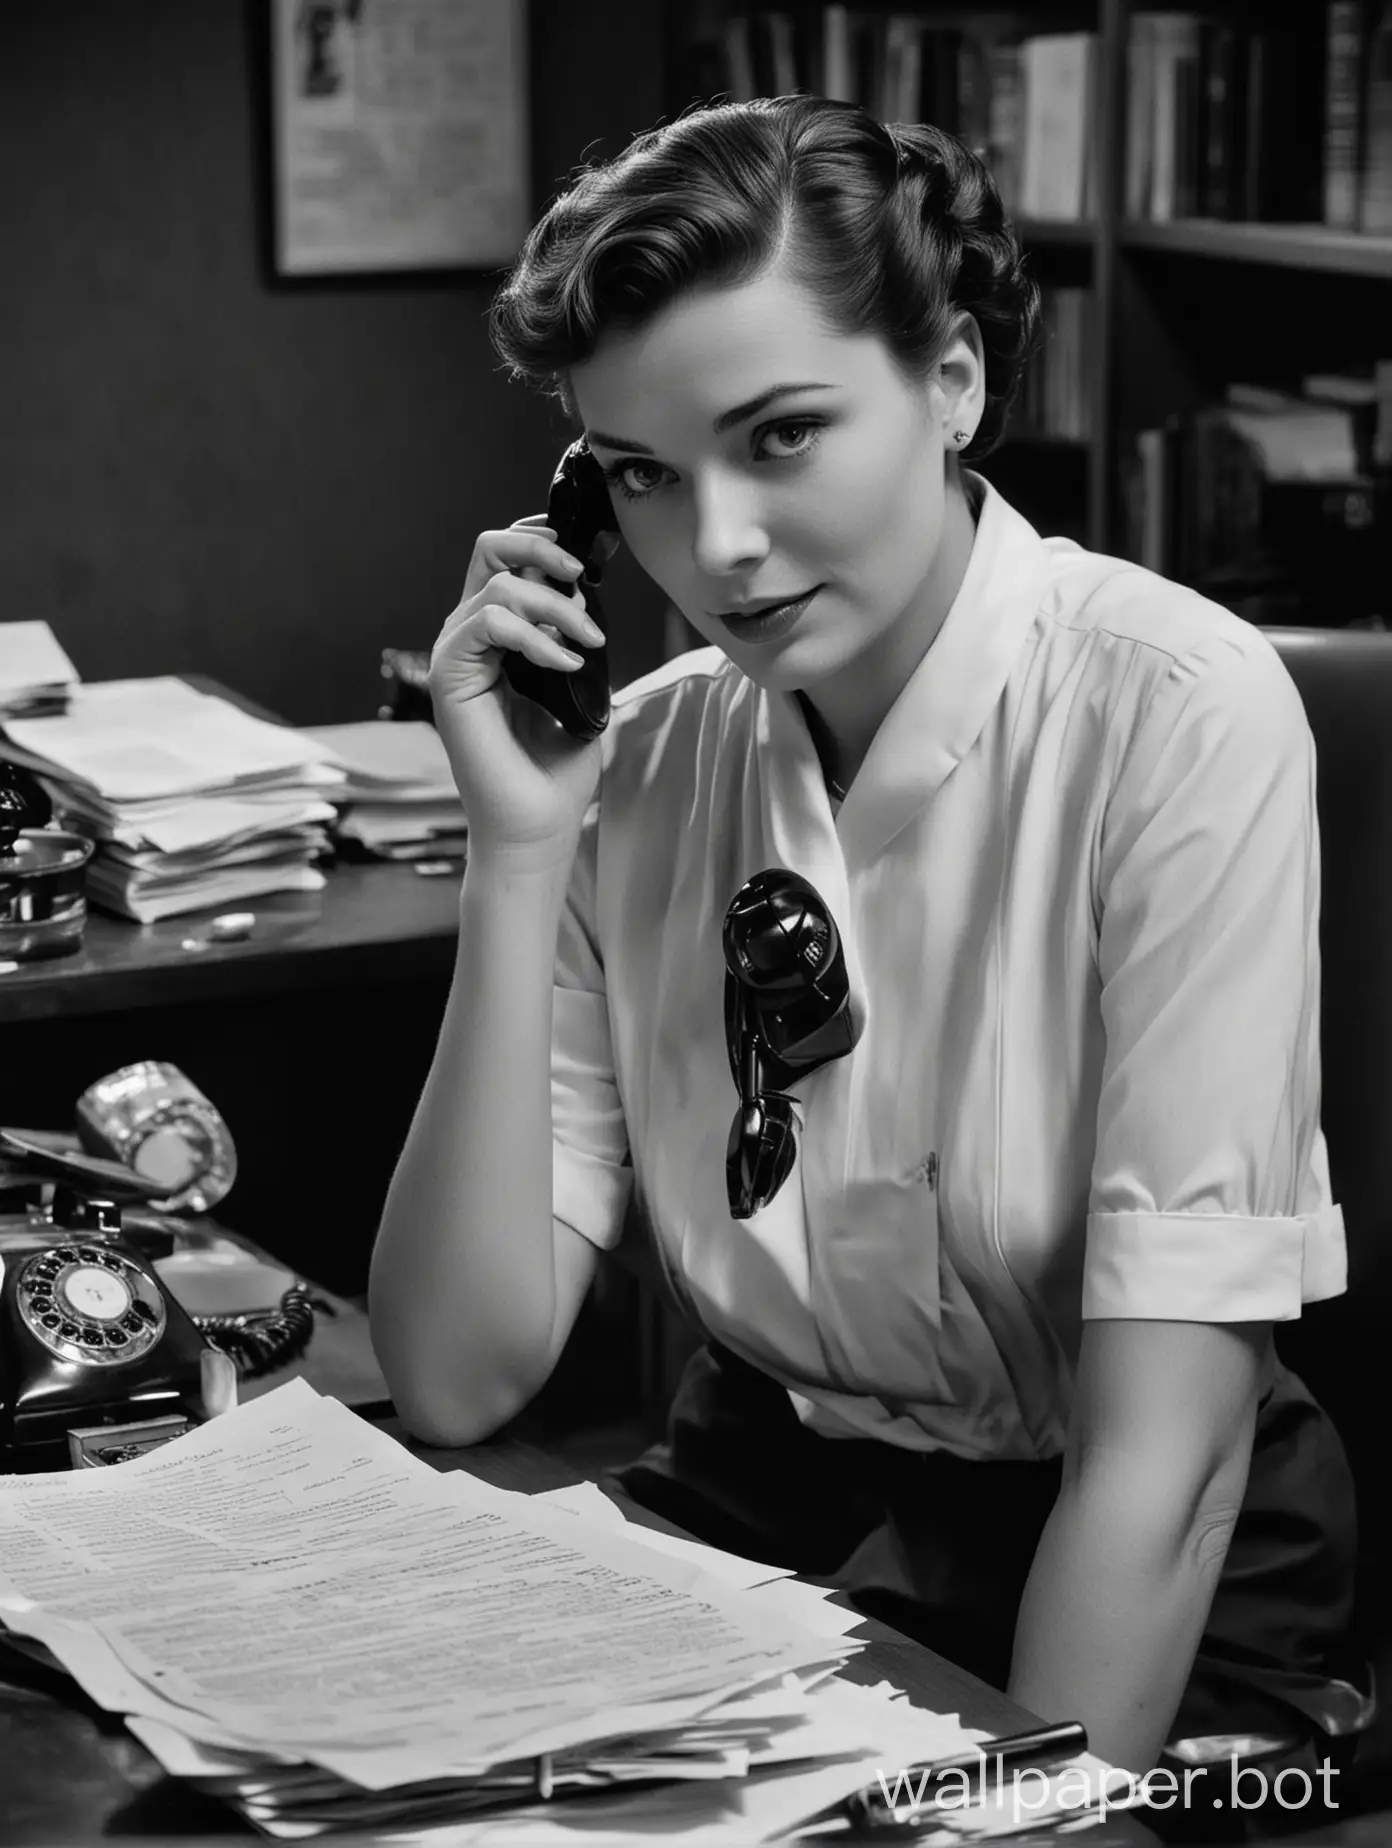 Vintage black and white photograph of an elegant woman from the 1950s at her desk, talking to someone over the phone in a front view. She is wearing simple with short hair tied back, facing forward directly at the camera. The scene captures candid moments during work as she has one hand holding the telephone aerial while her other hand is busy working behind the office table. In the table there is a seafood cocktail and a manu paper spilled with a little sause. Her expression reflects focus or attention while watching something. Black background. Shot in the style of "Super stock" photography.